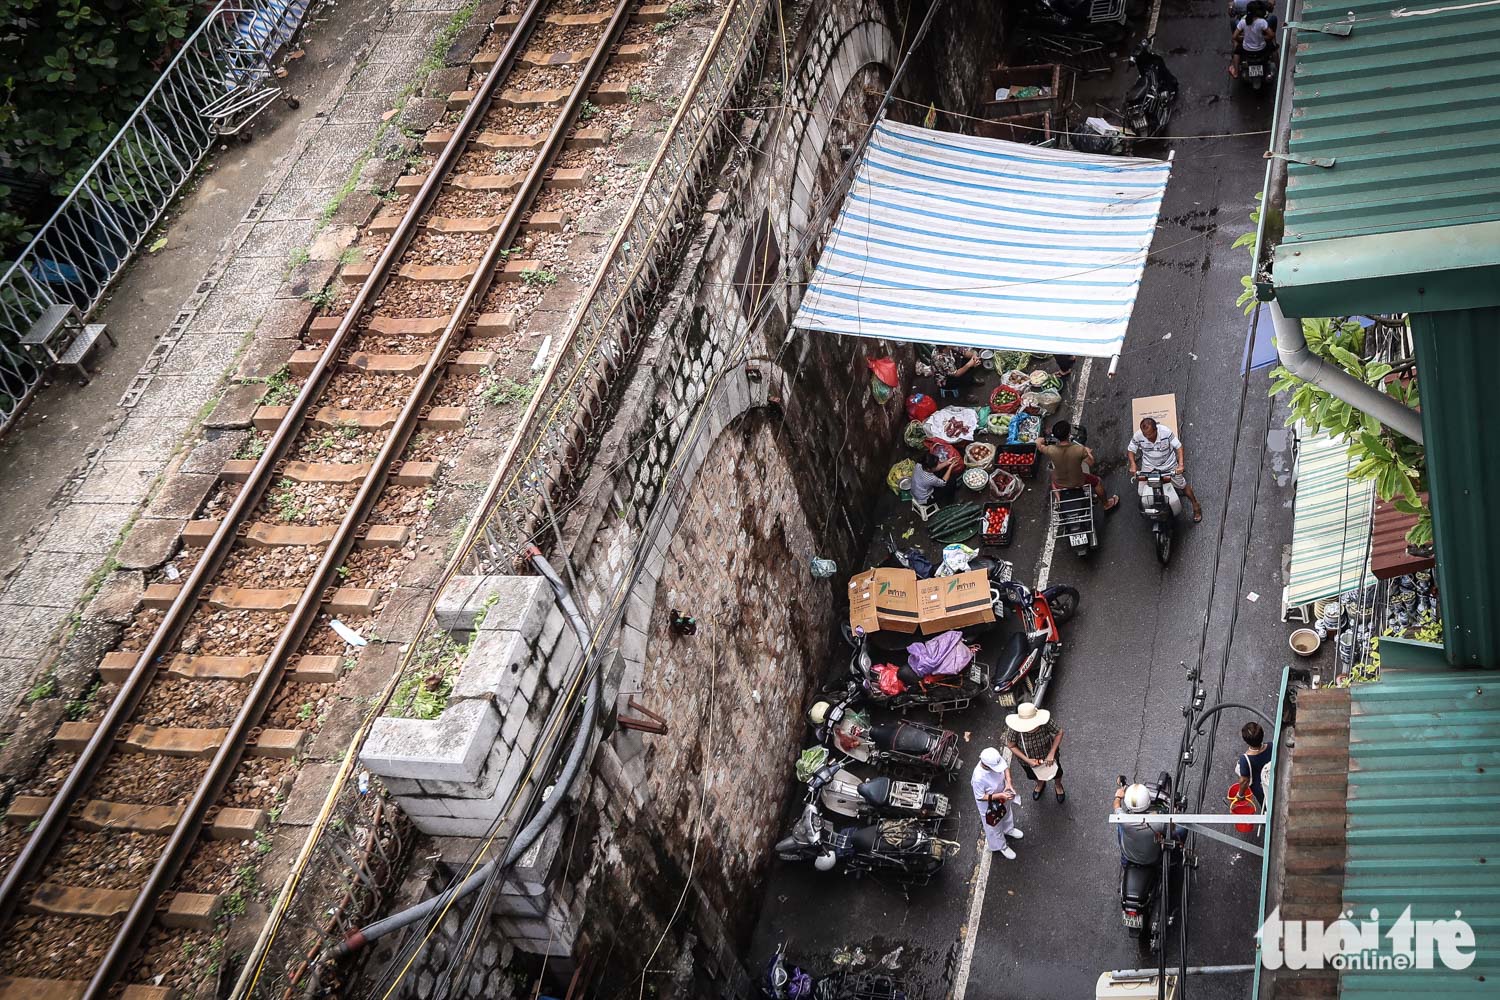 Areas surrounding the elevated railway are often filled with business activities of local vendors.